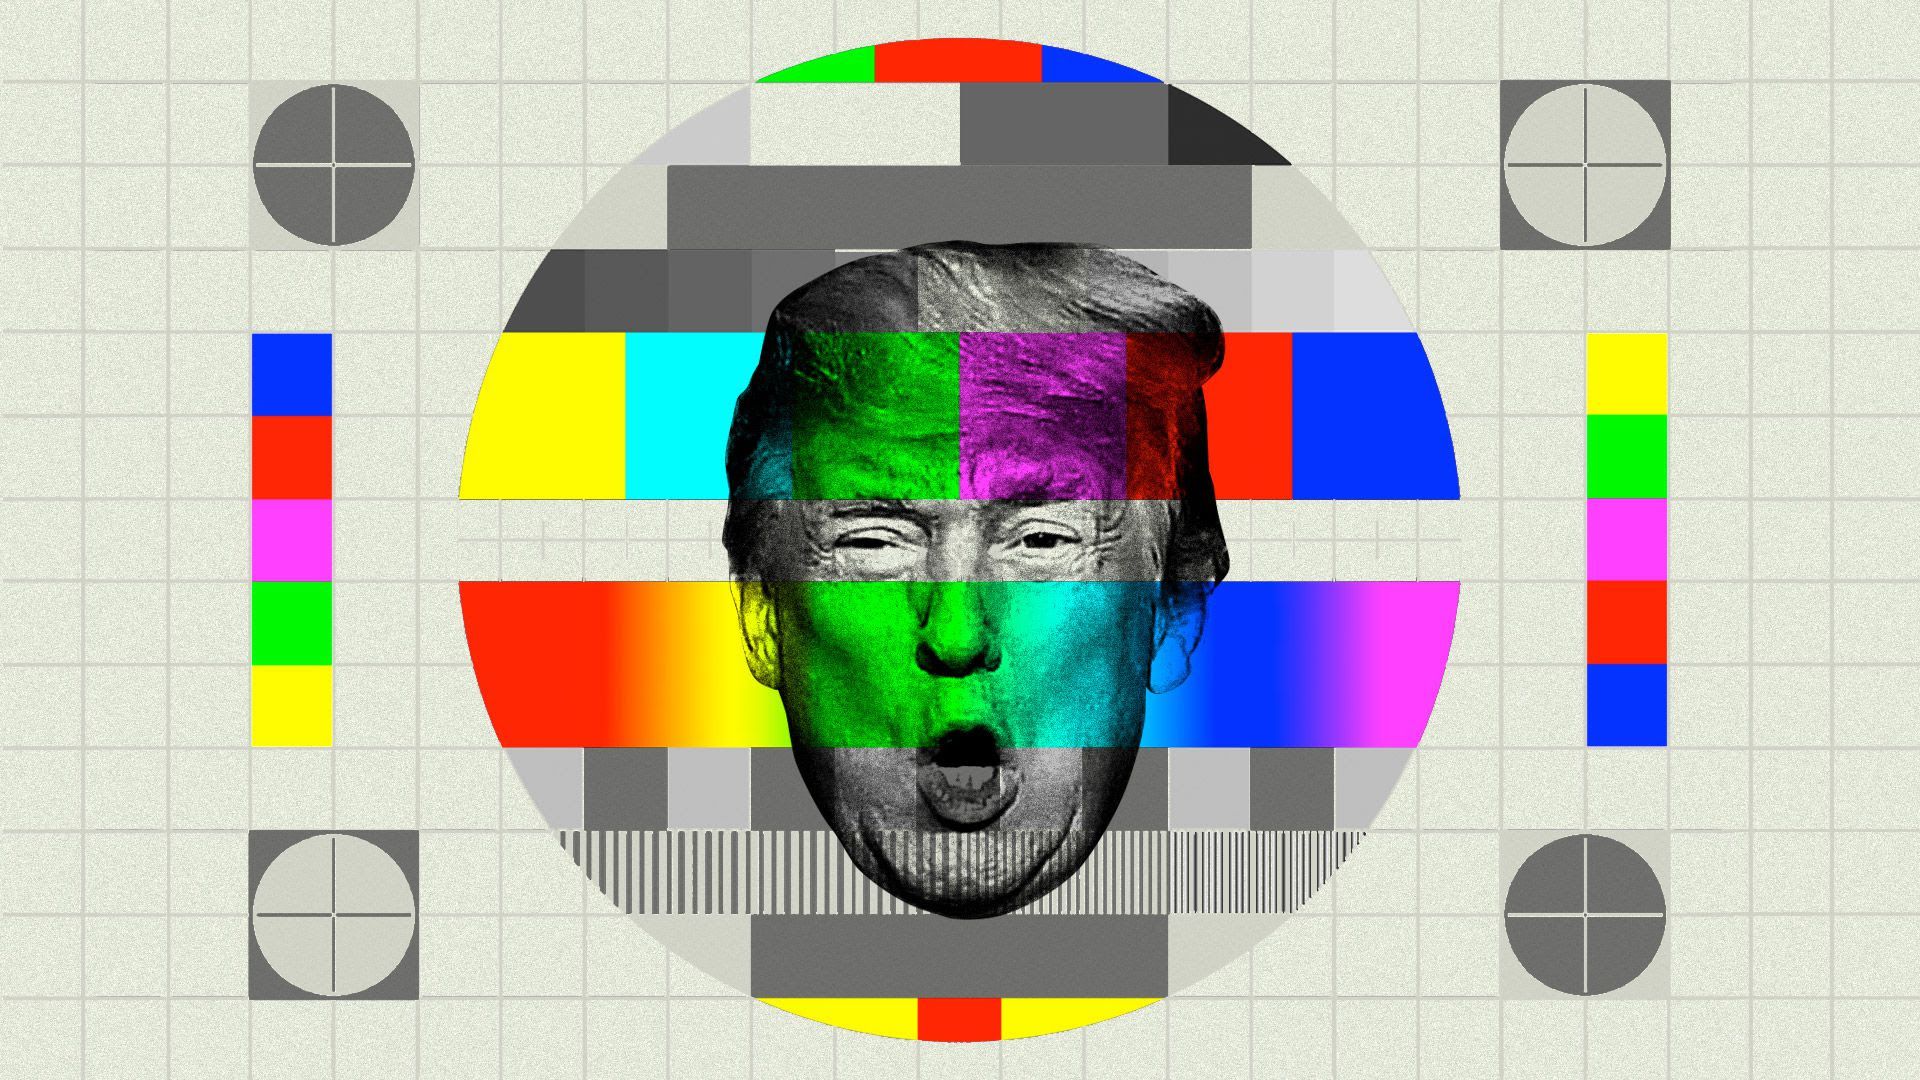 An illustration of Trump's talking head in a TV screen with a pixelated rainbow 